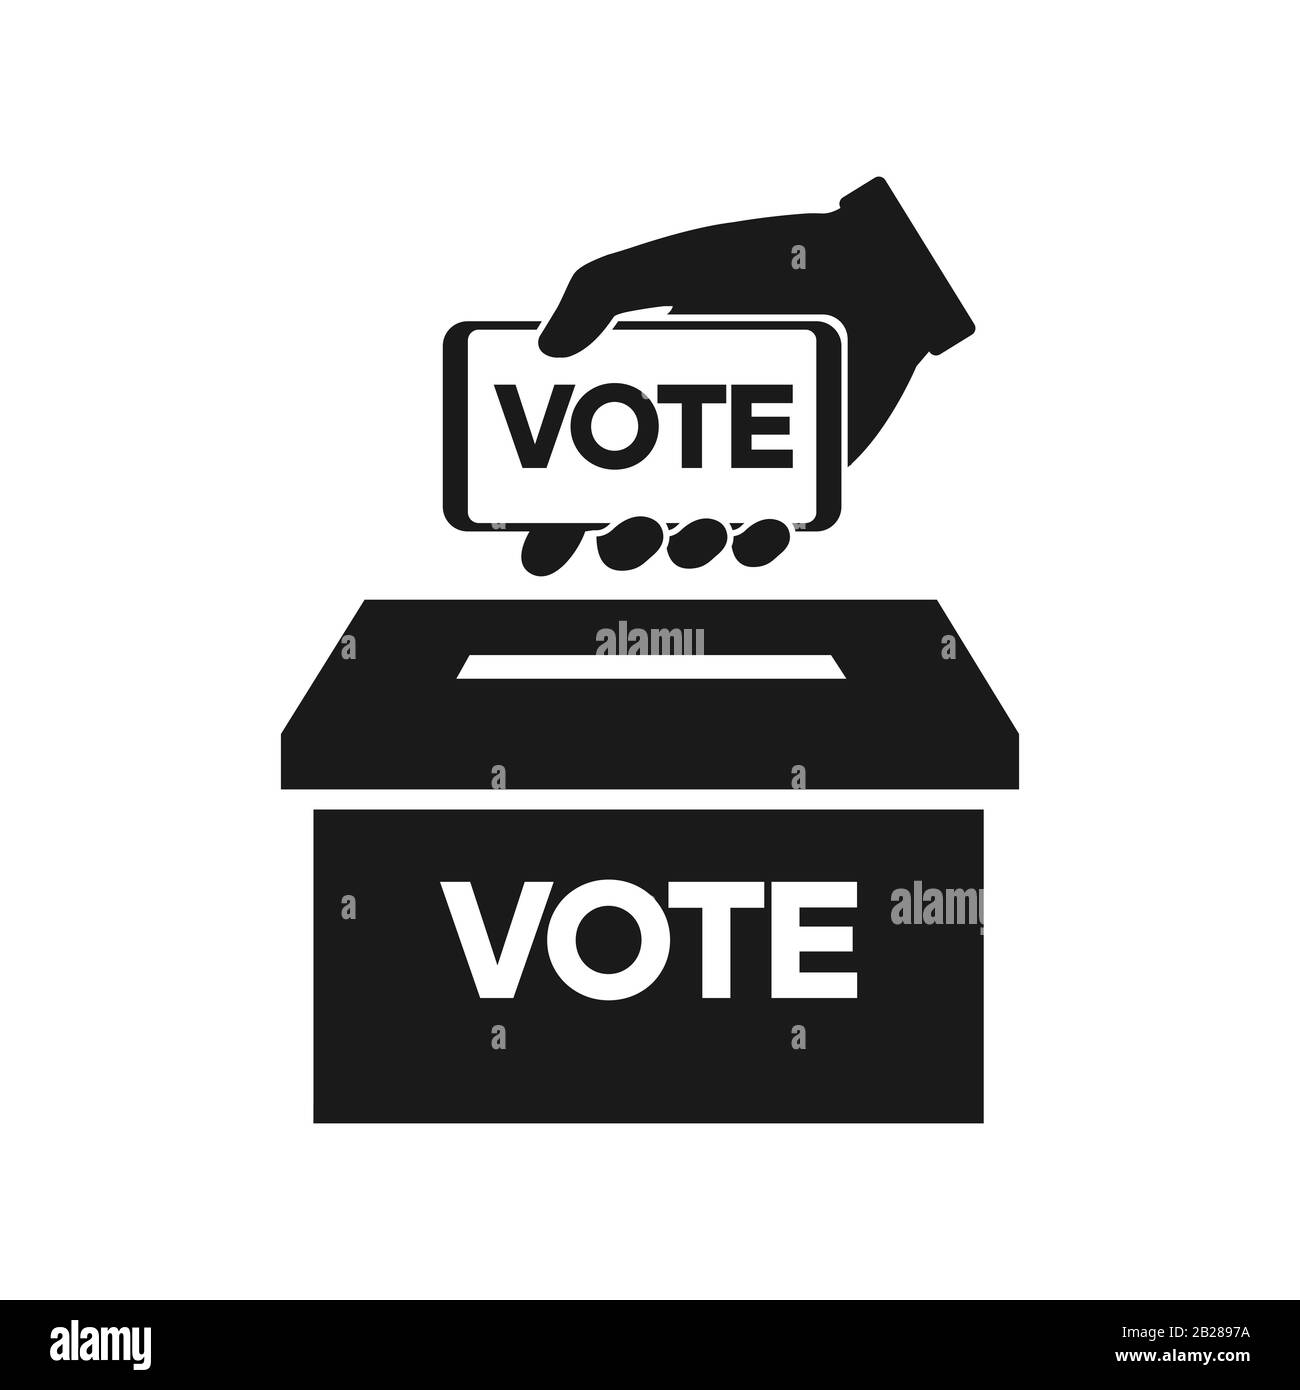 Voting icon hand putting vote paper in the box Stock Vector